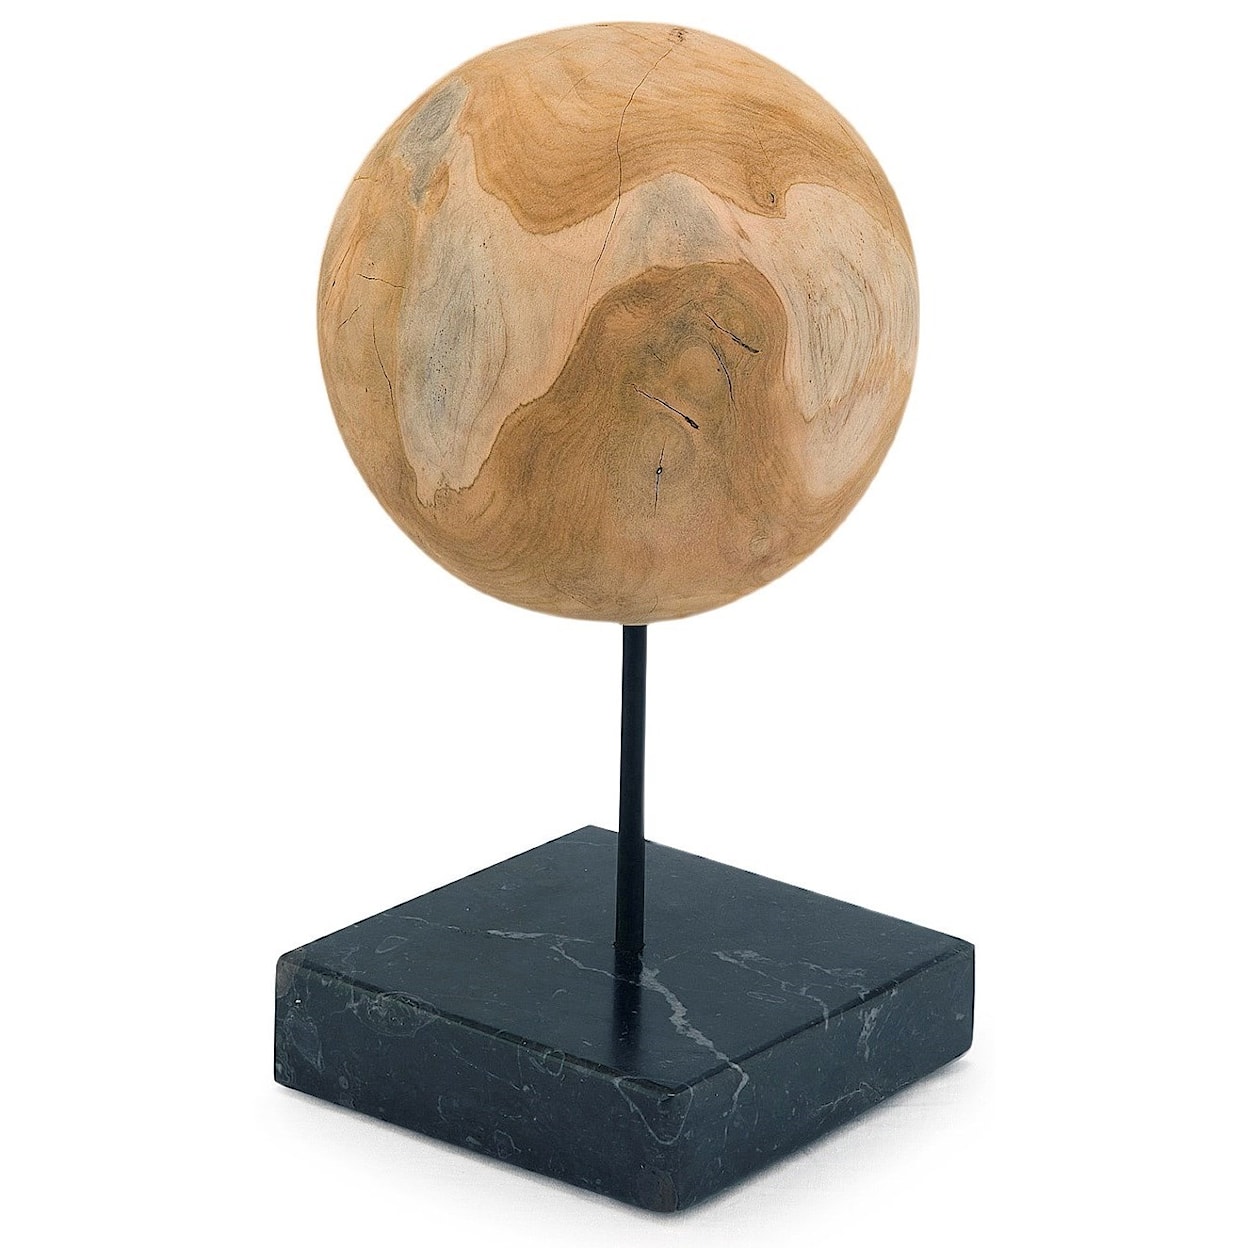 Moe's Home Collection Sculptures Round Teak Ball On Black Marble Base Medium